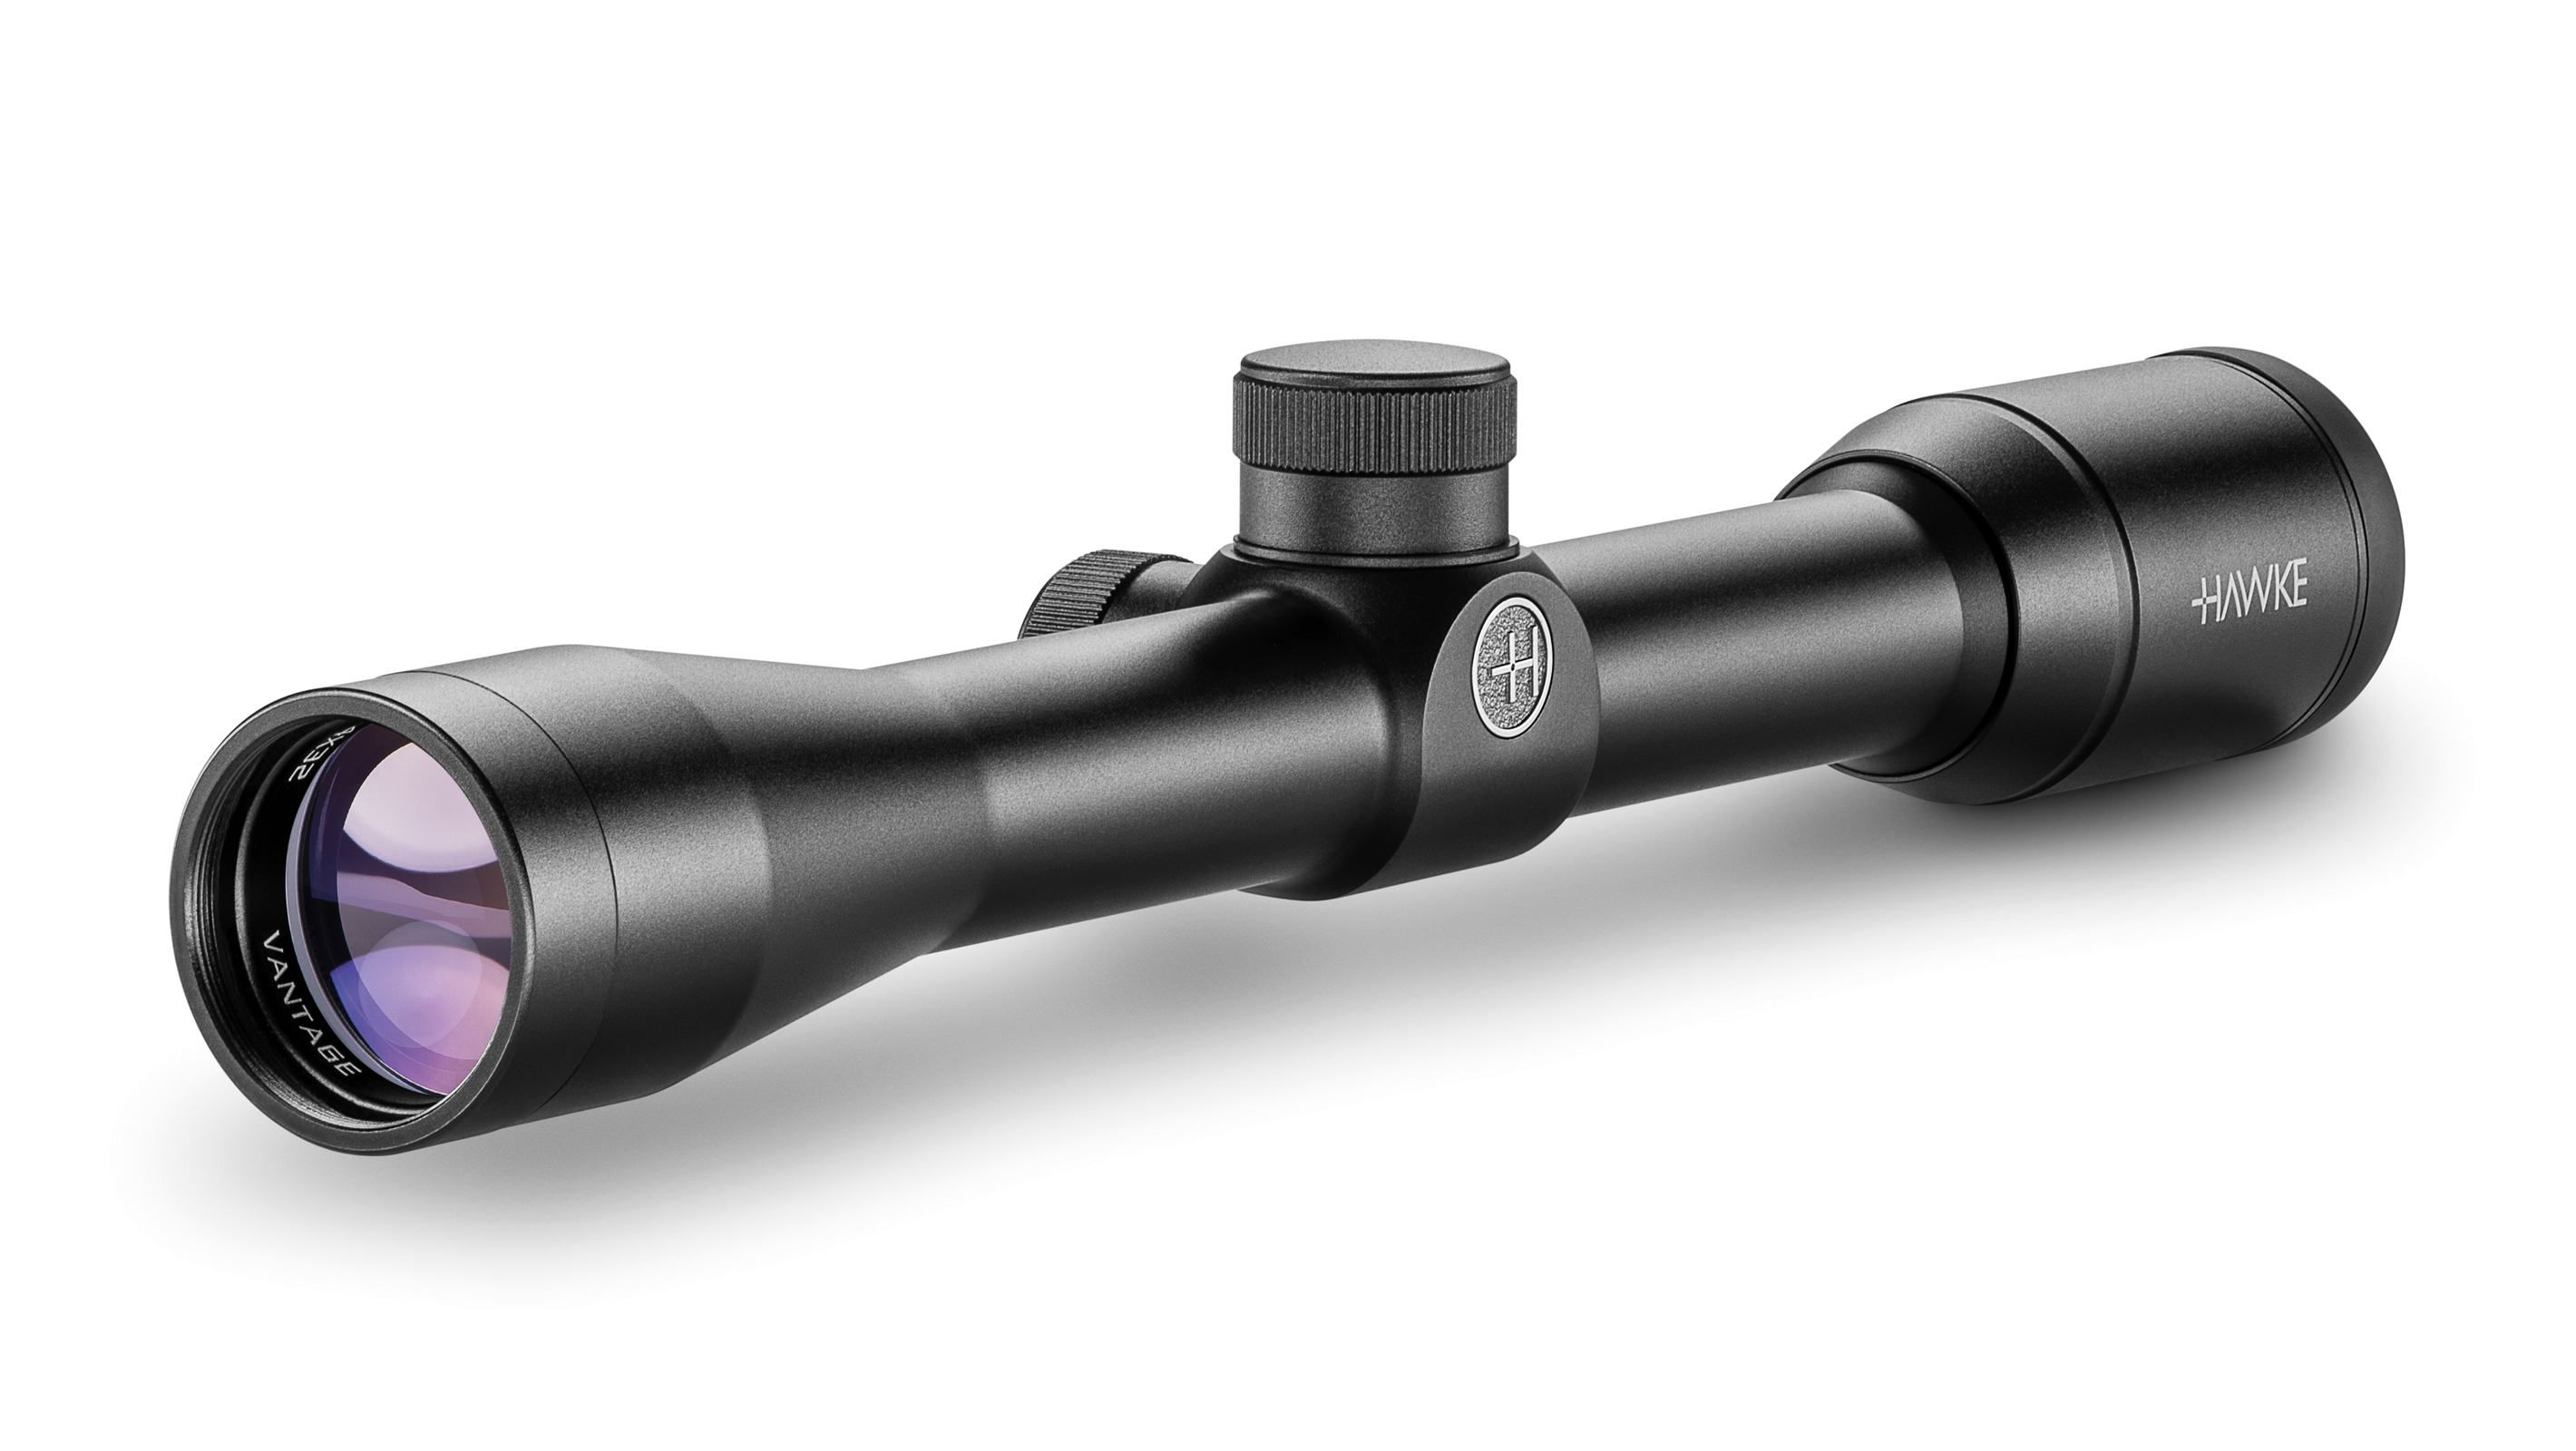 Objective End View Of The Hawke Vantage 4x32 30/30 Duplex Rifle Scope